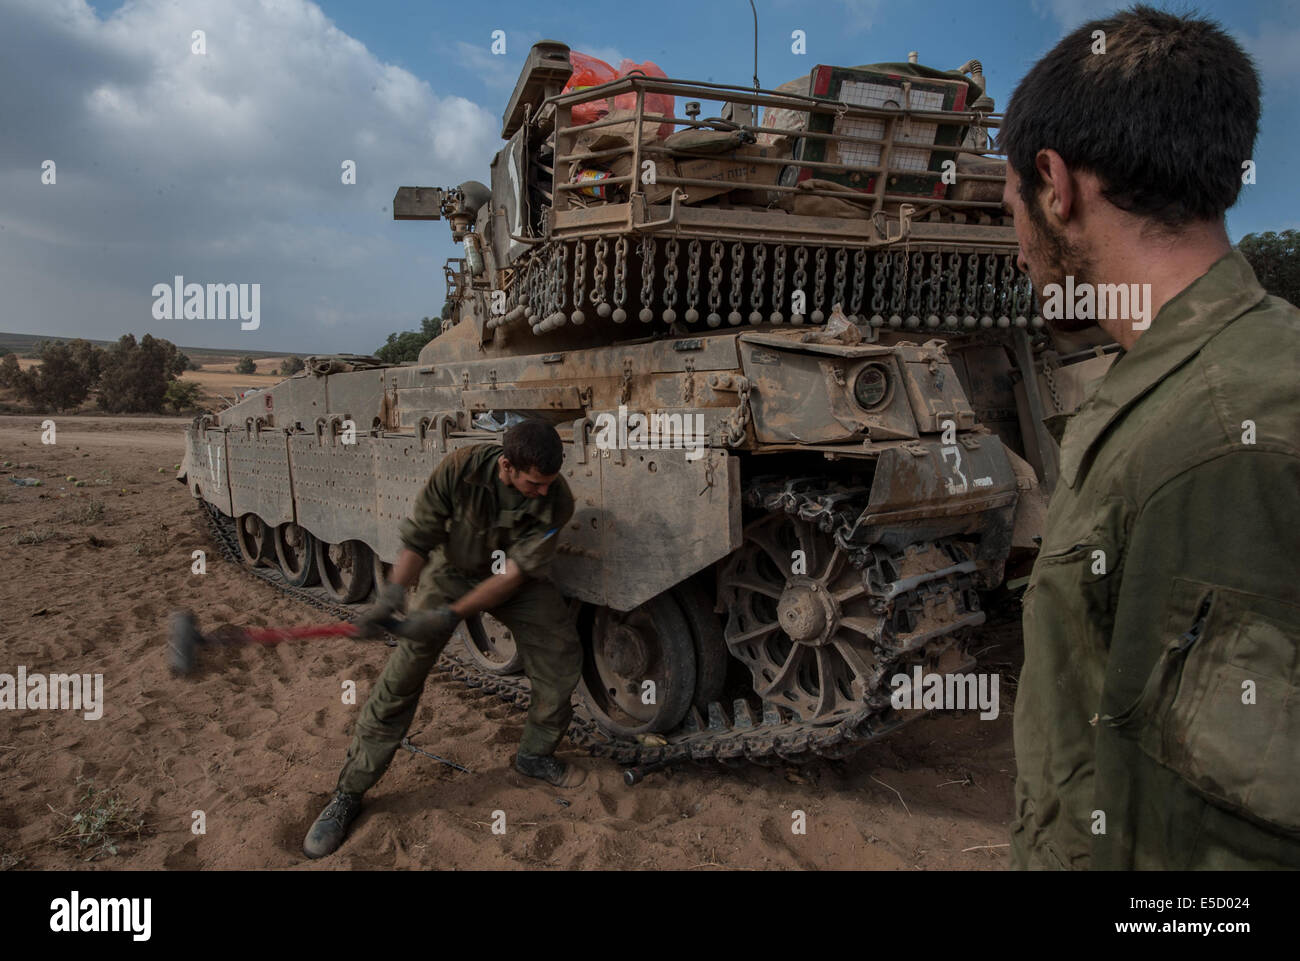 Gaza Border. 28th July, 2014. Israeli soldiers fix the caterpillar track of a Merkava tank in southern Israel near the border with Gaza, on July 28, 2014. The UN Security Council on Monday issued an urgent appeal to Israel and Hamas for an immediate humanitarian truce in Gaza, where more than 1,030 Palestinians and 43 Israeli soldiers were killed over the past few weeks. Credit:  Li Rui/Xinhua/Alamy Live News Stock Photo